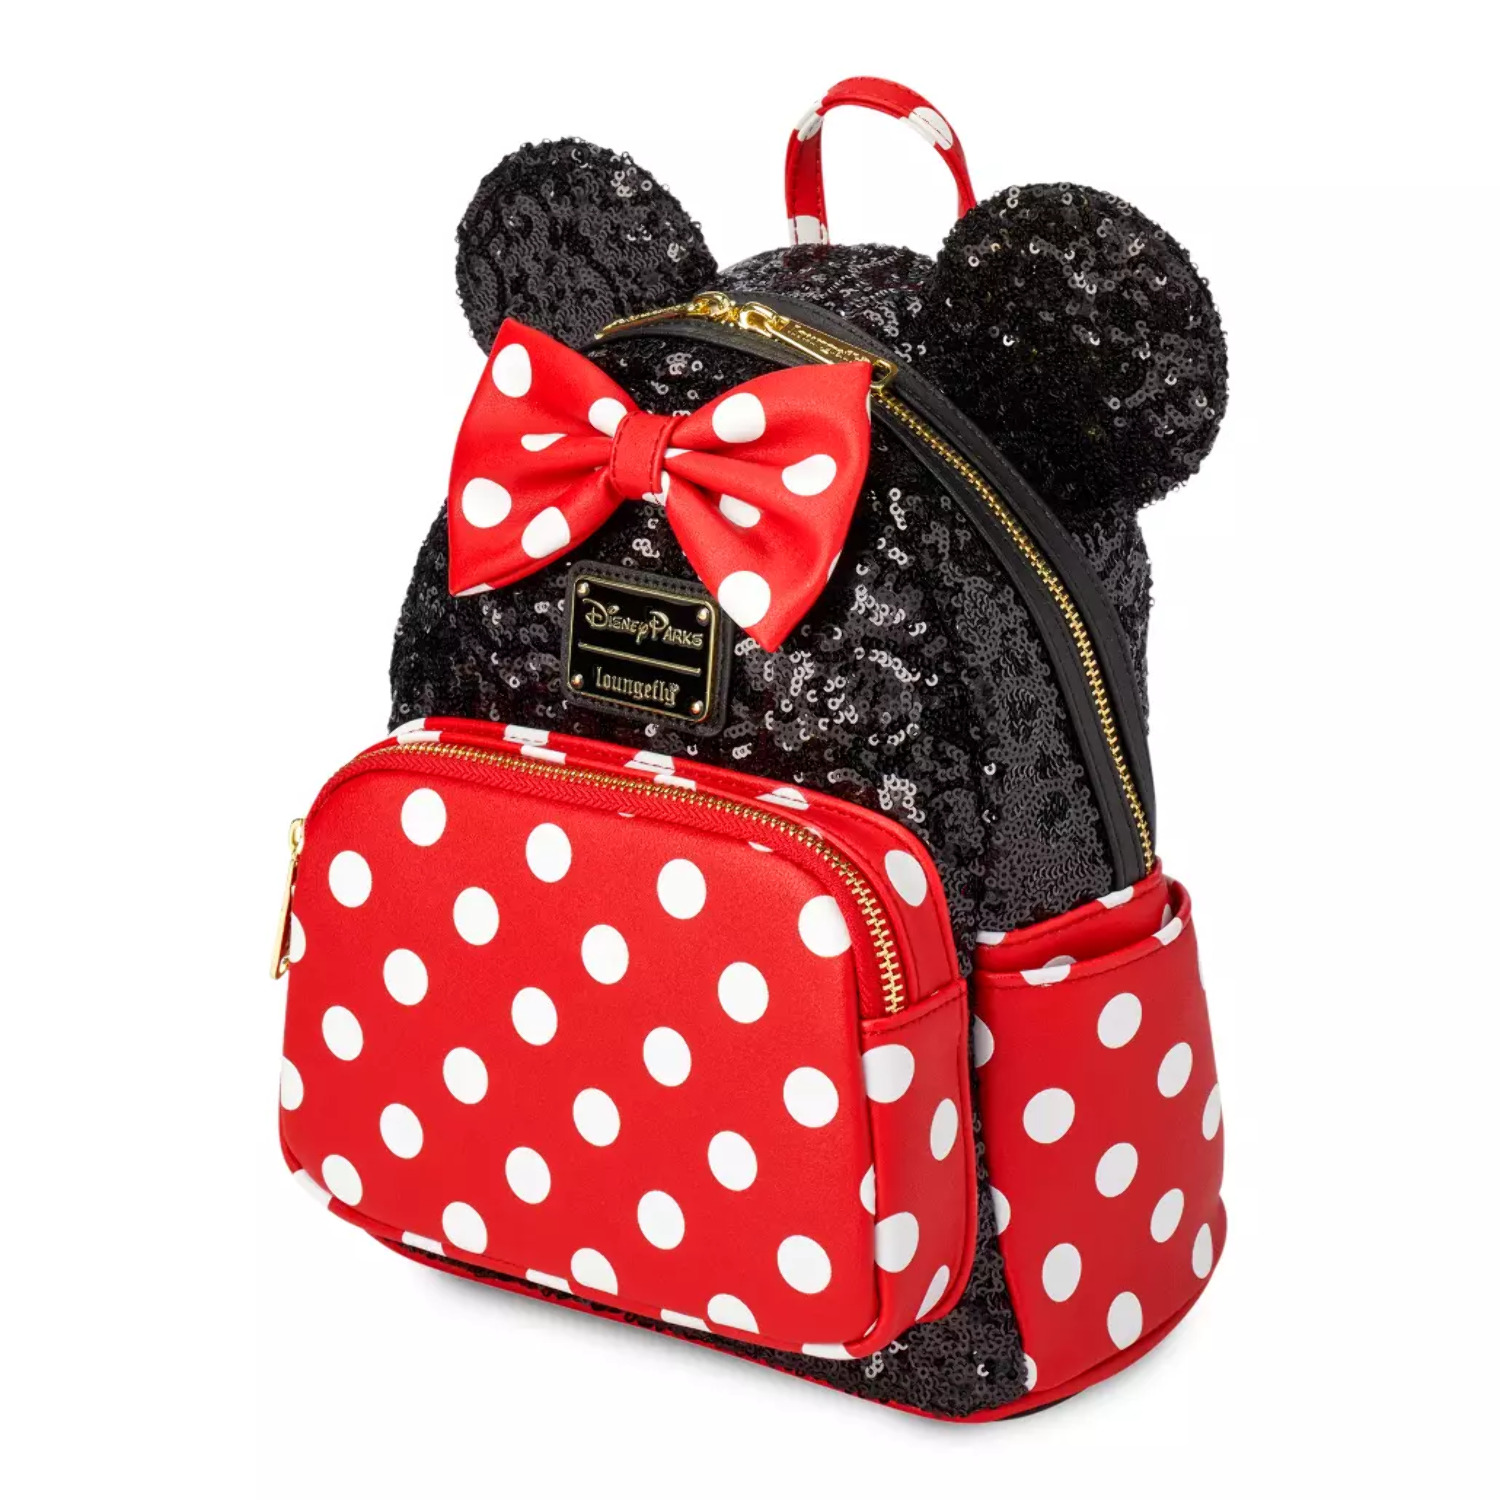 Disney Parks Minnie Sequin And Polka Dot Mini Backpack New With Tag - image 3 of 4